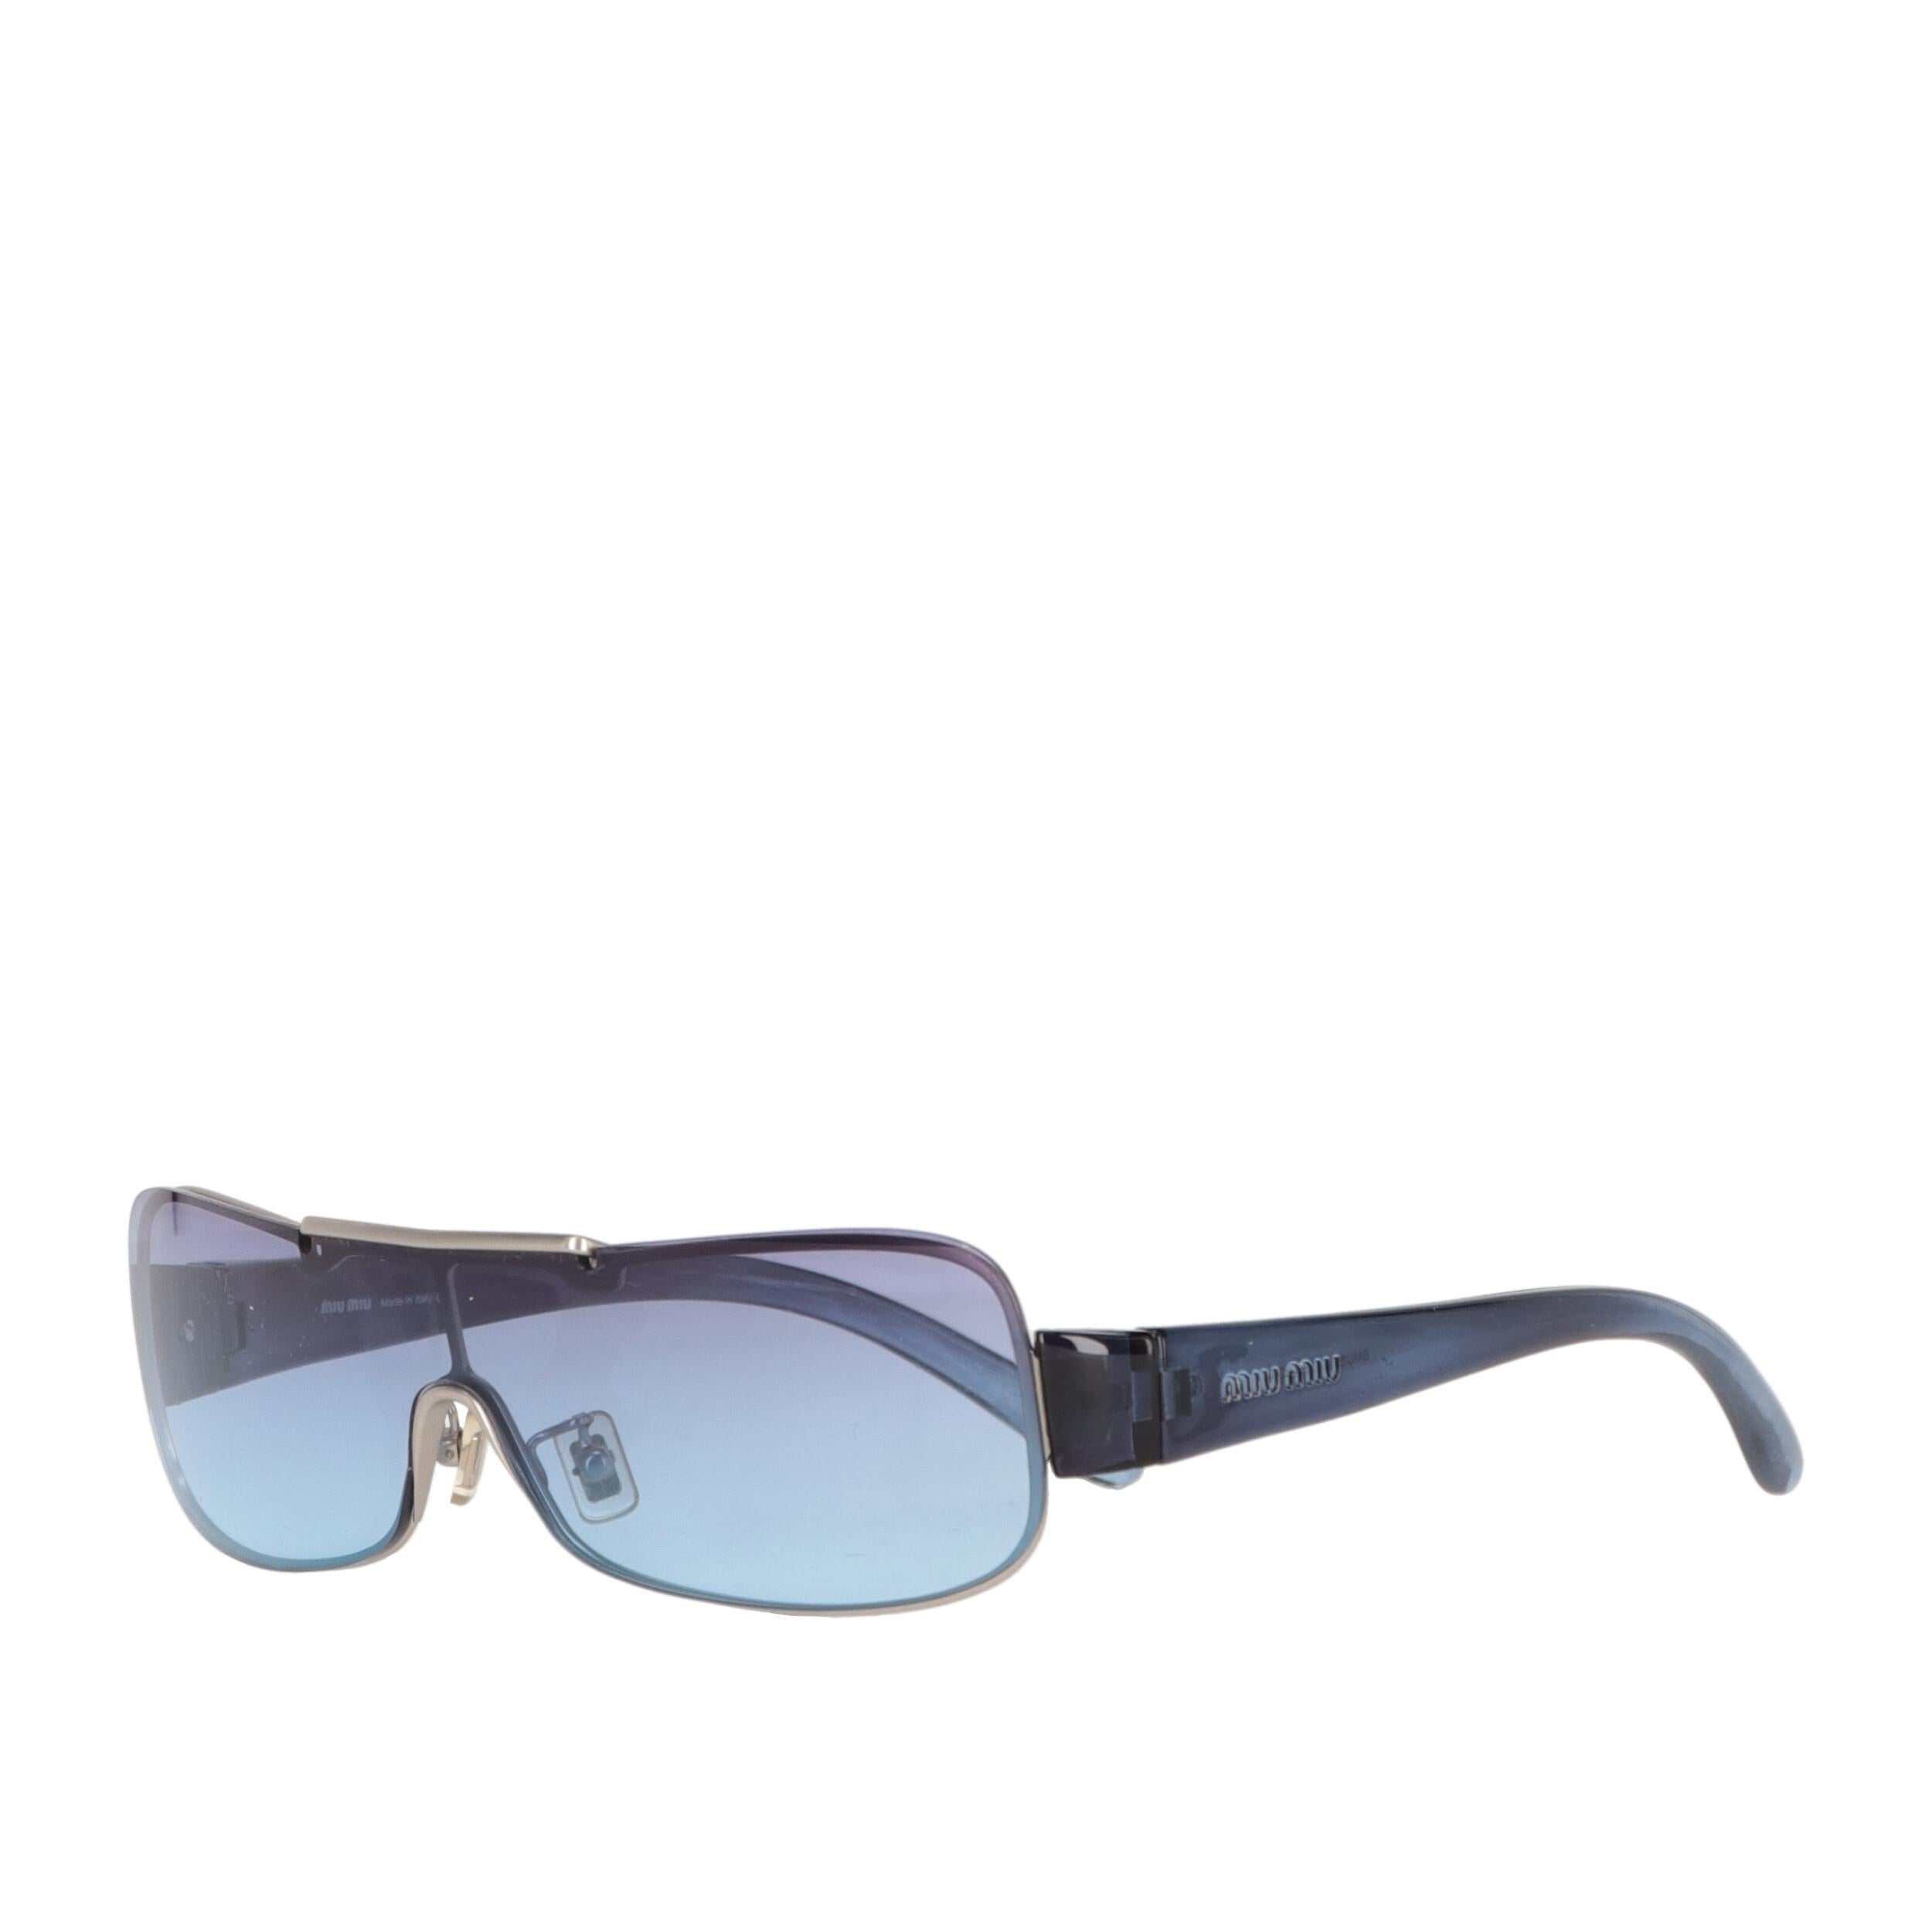 Miu Miu silver-tone frame mask sunglasses with dark blue temples and shaded  purple and blue lenses.

Please note, this item cannot be shipped to the US.

Years: 2000s

Made in Italy

Width: 14 cm
Height: 3,5 cm